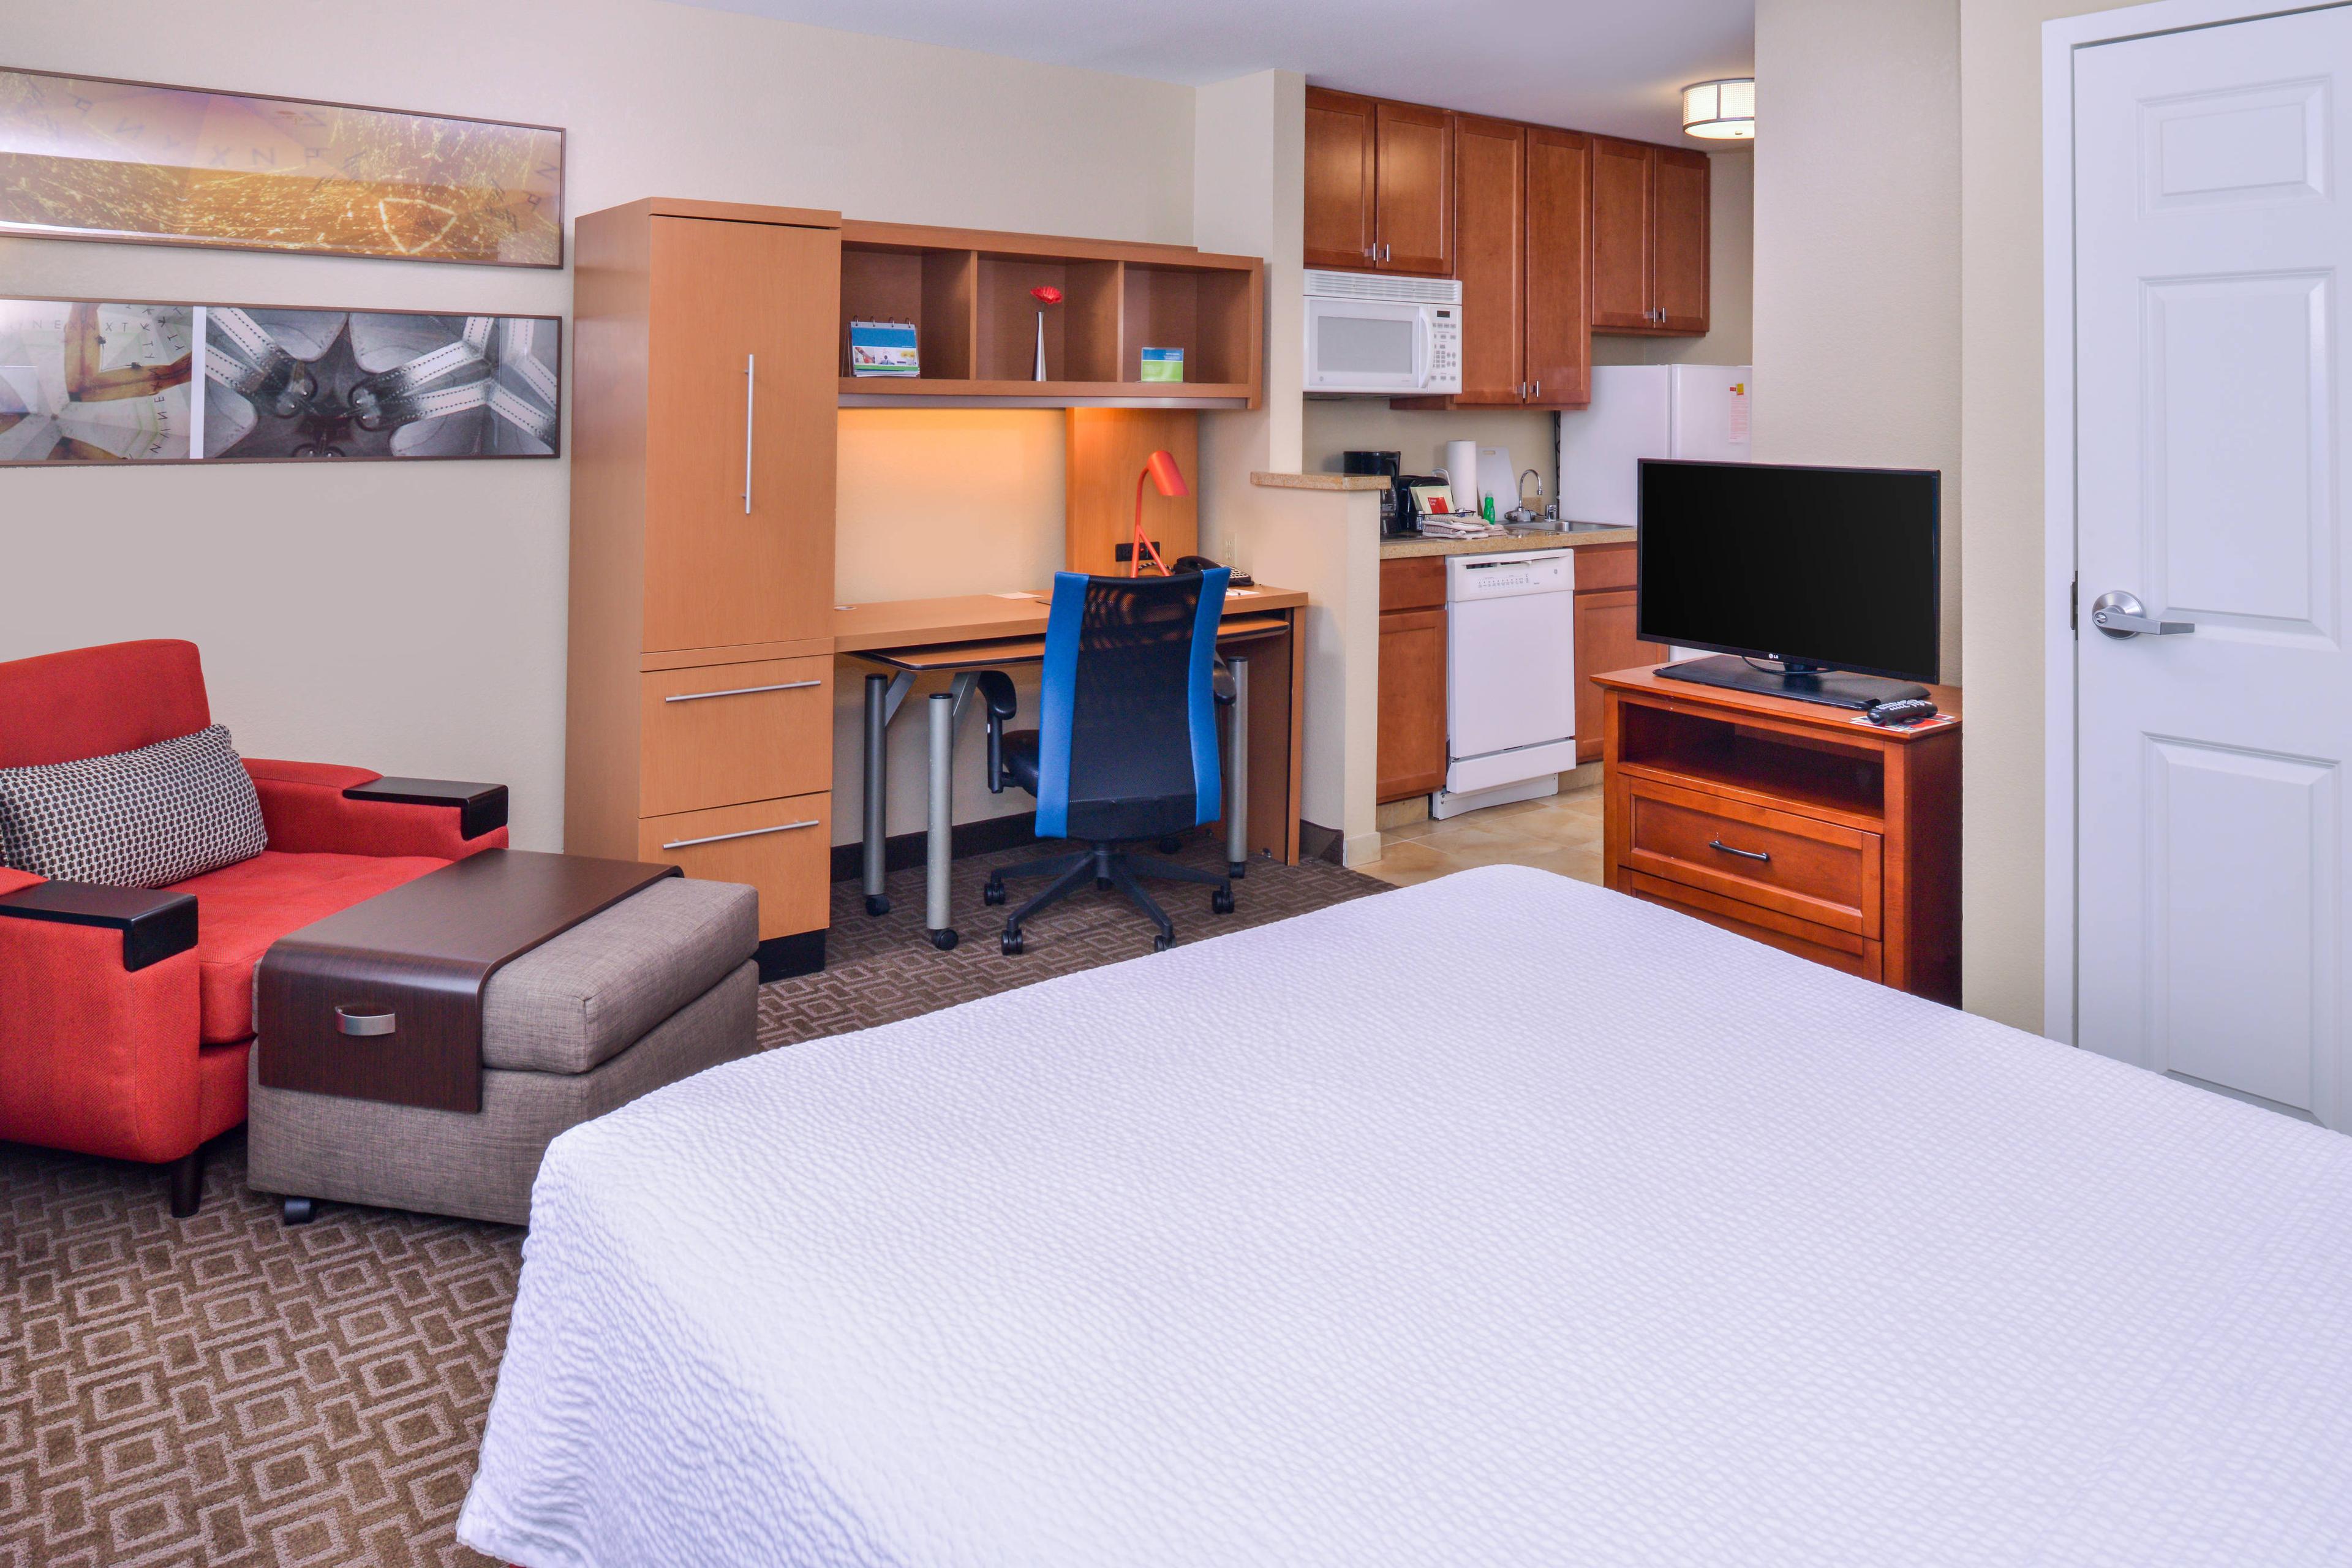 Our Studio Queen Suites feature a spacious queen-size bed with comfortable bedding; a full kitchen that includes a refrigerator, dishwasher, microwave, and stove top; a large work desk; and complimentary Wi-Fi.